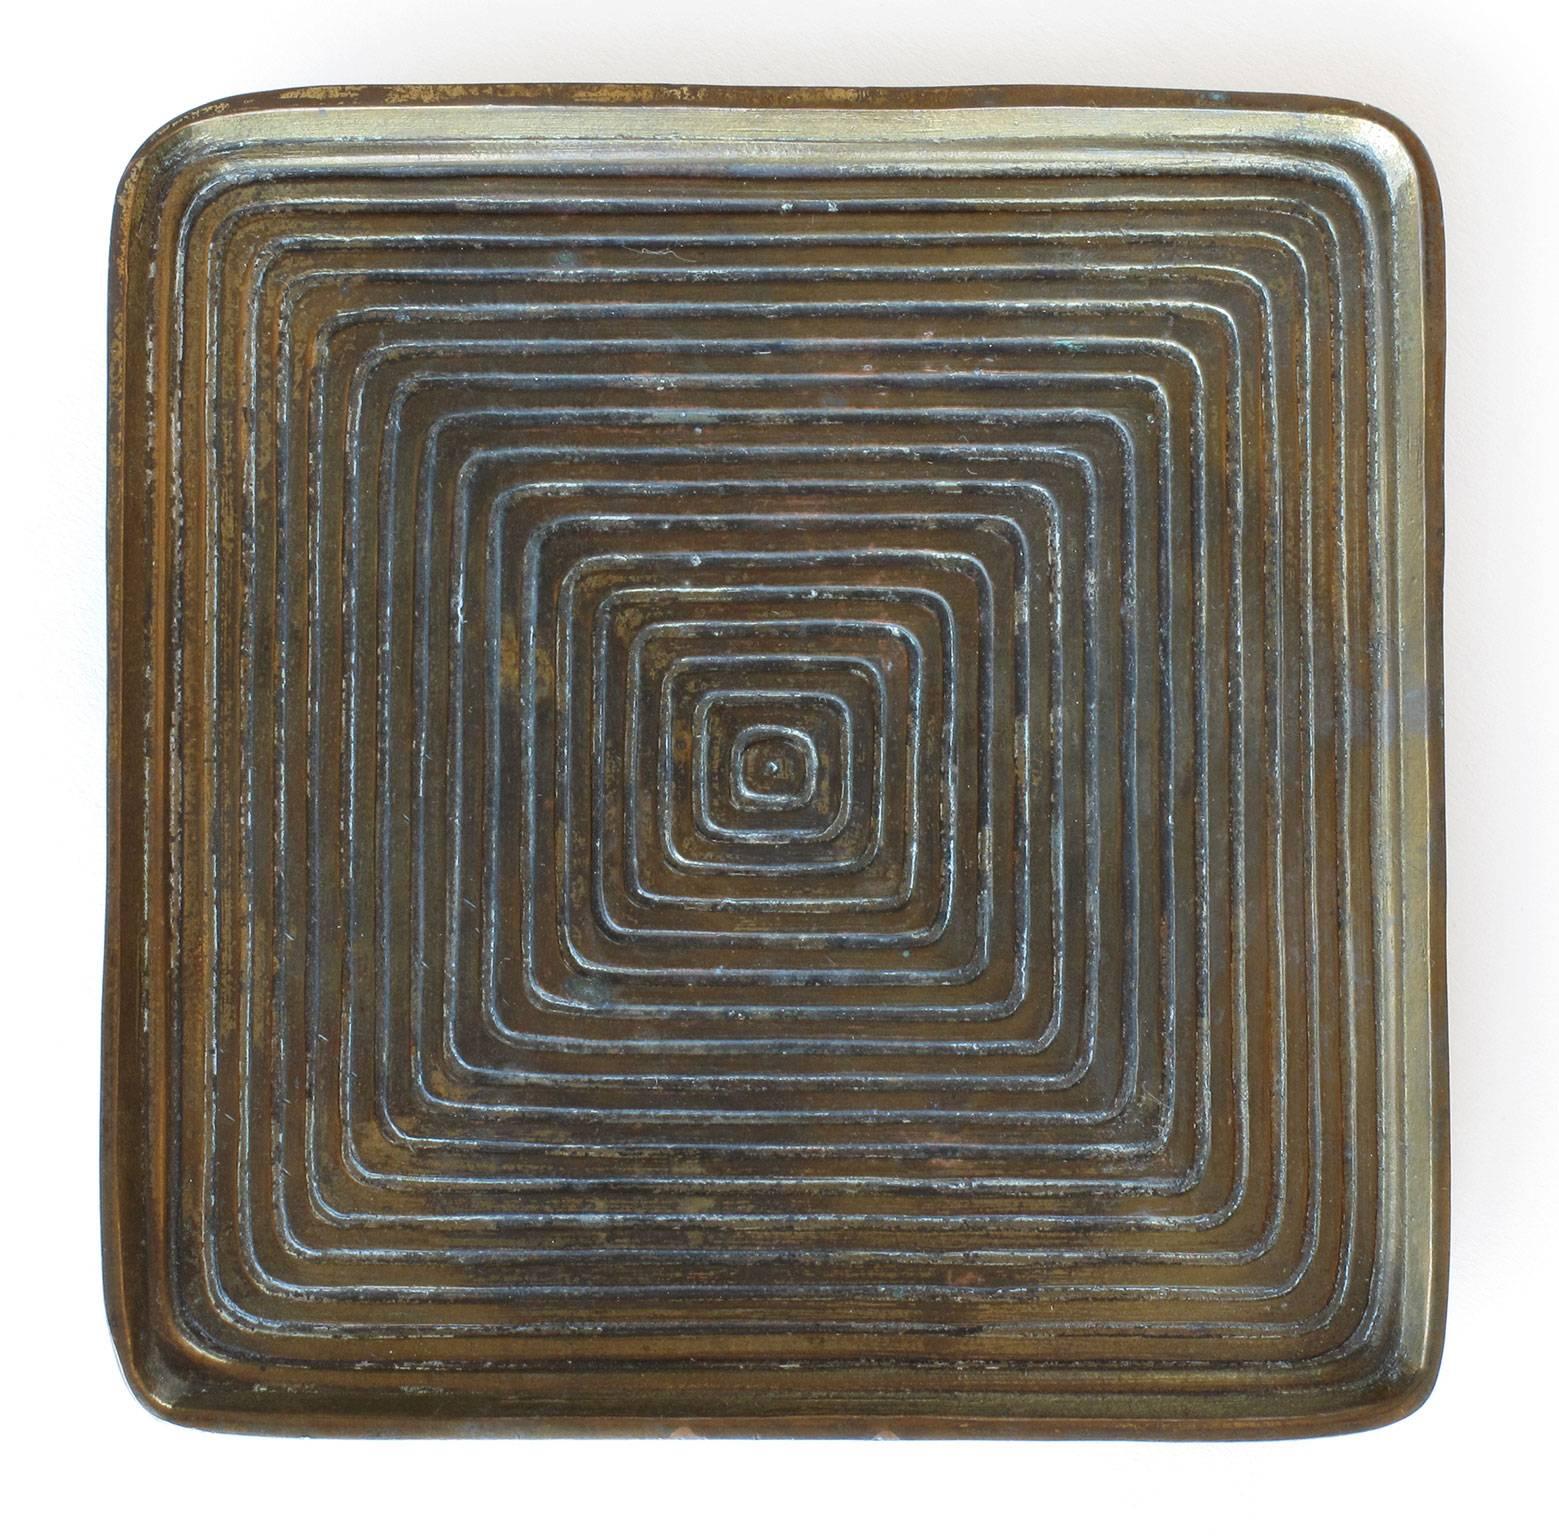 Ben Seibel Square Shaped Brass Tray with Concentric Squares Design Jenfred Ware For Sale 2